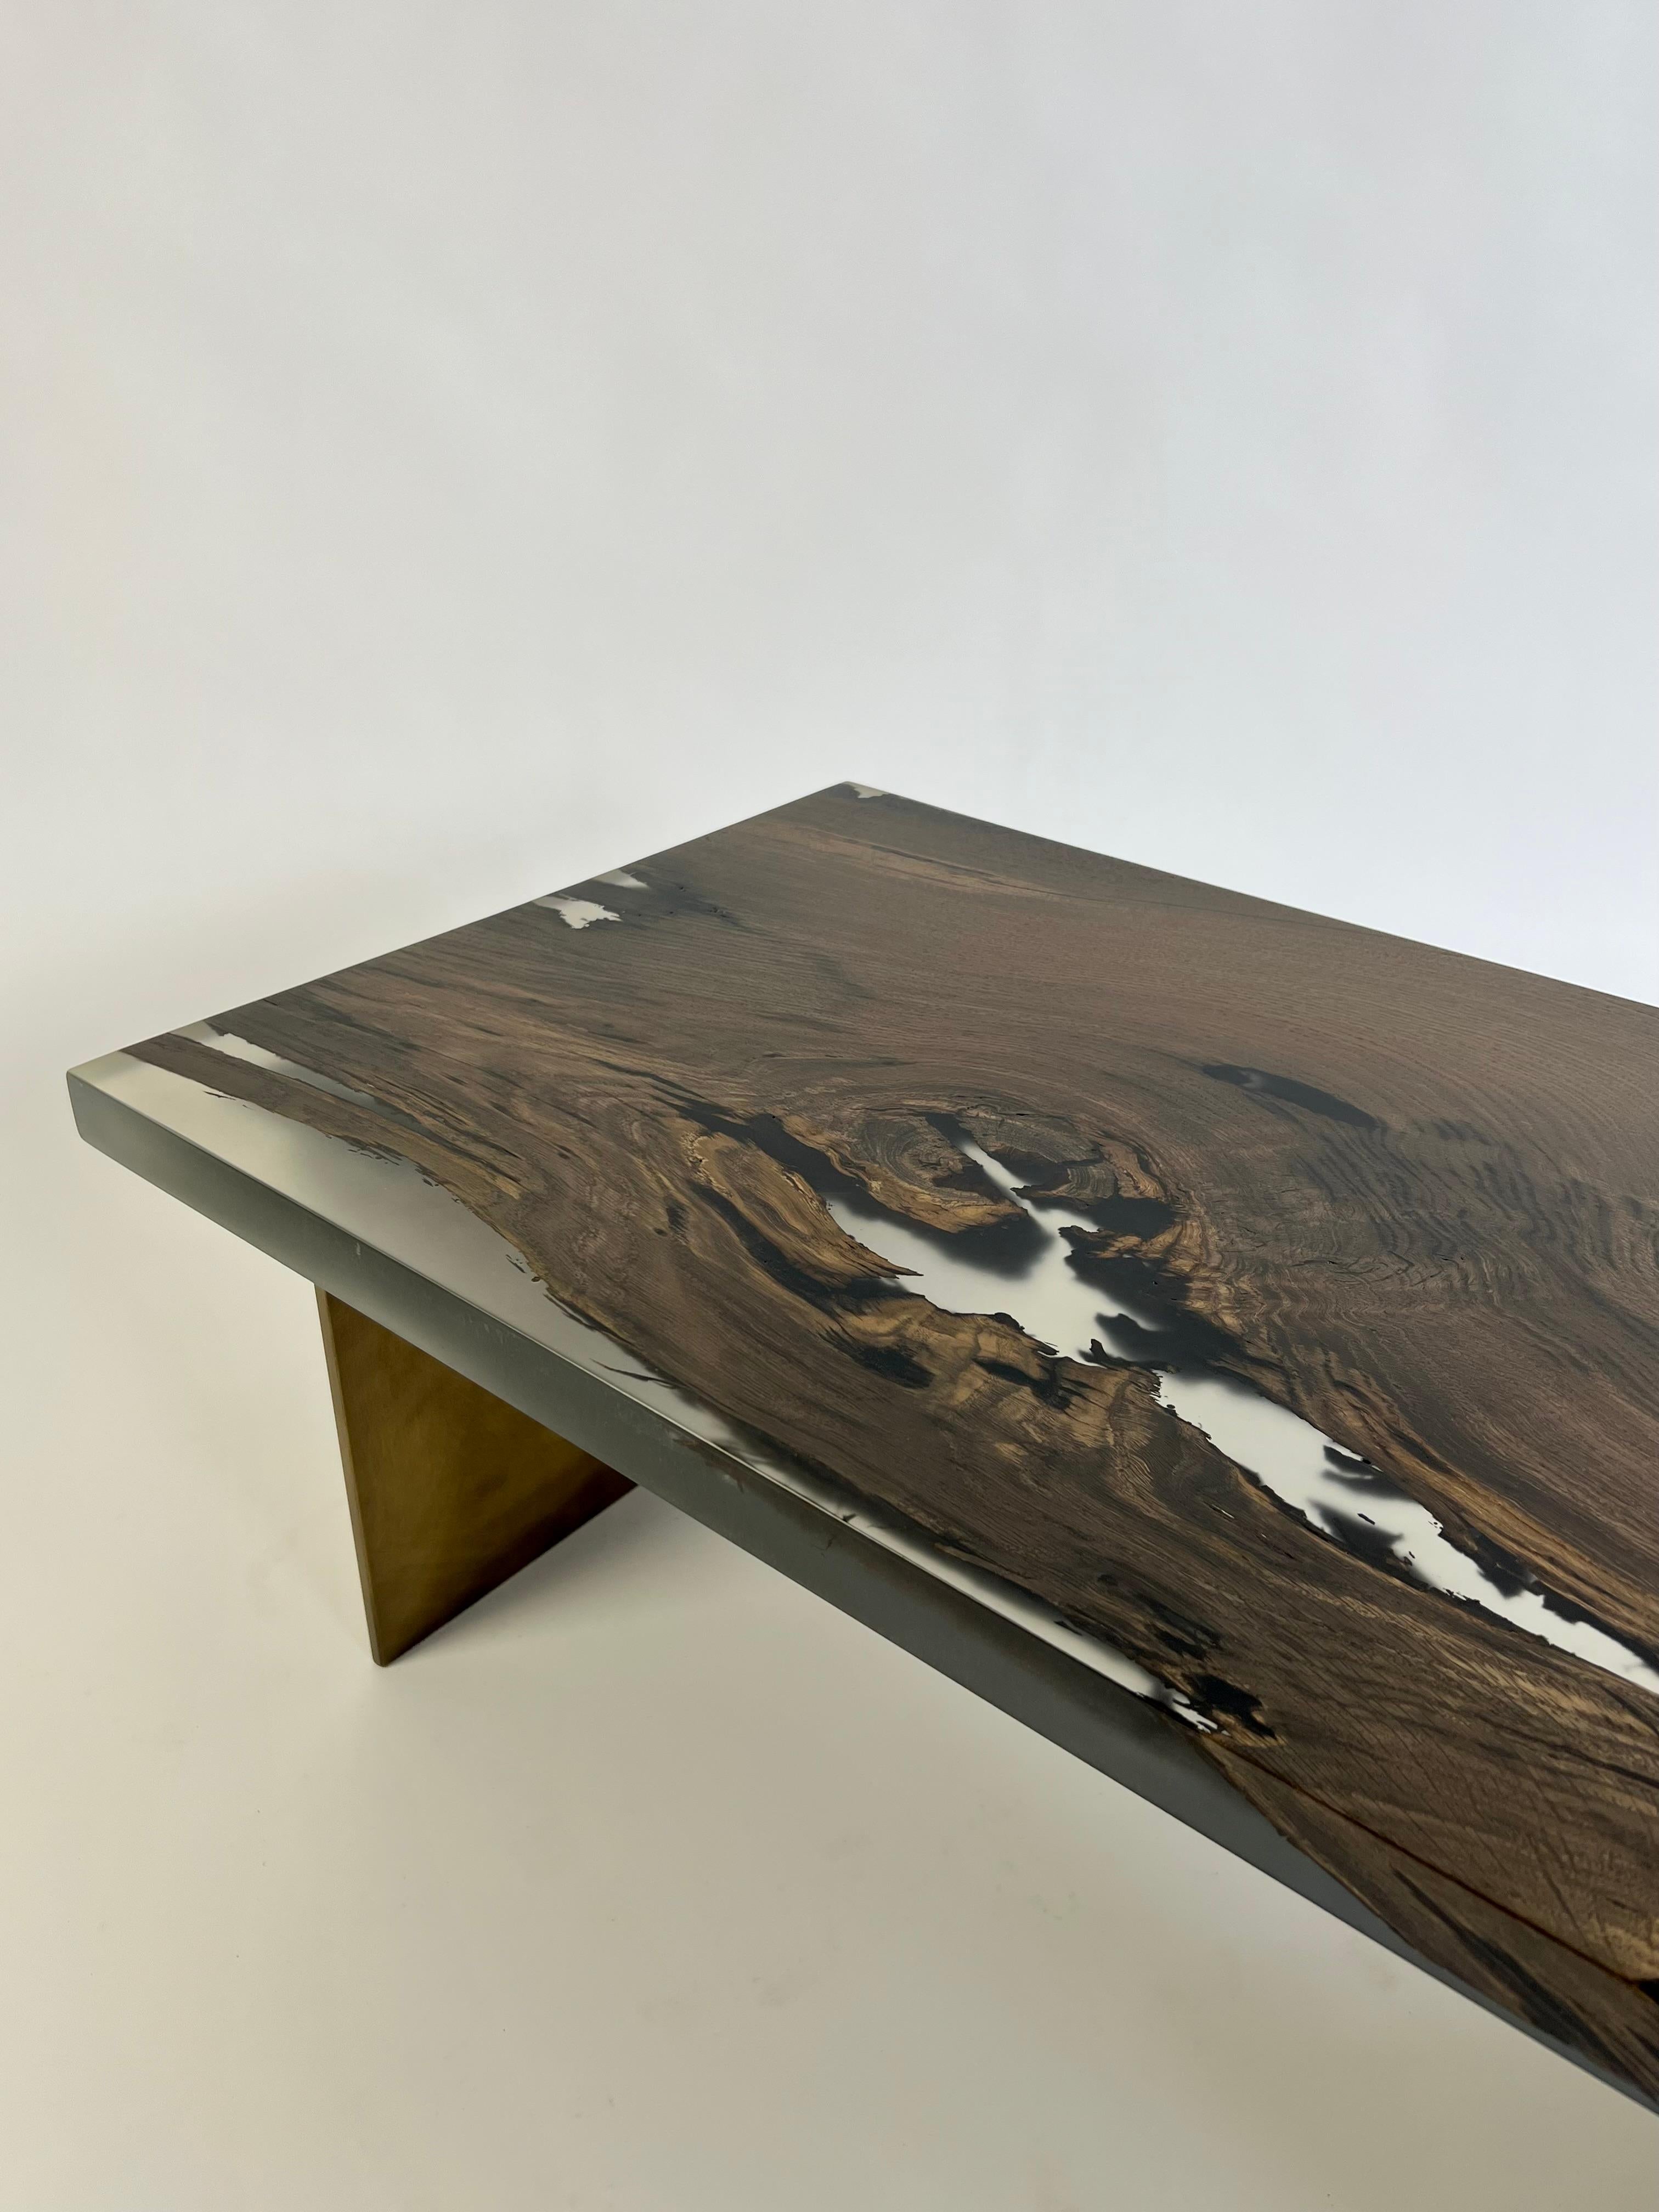 This is a unique coffee table crafted from Bog Oak and epoxy resin. The wood itself is an astounding 7,000 years old, originating from Romania and having remained buried underground for millennia. Its exceptional preservation is owed to its